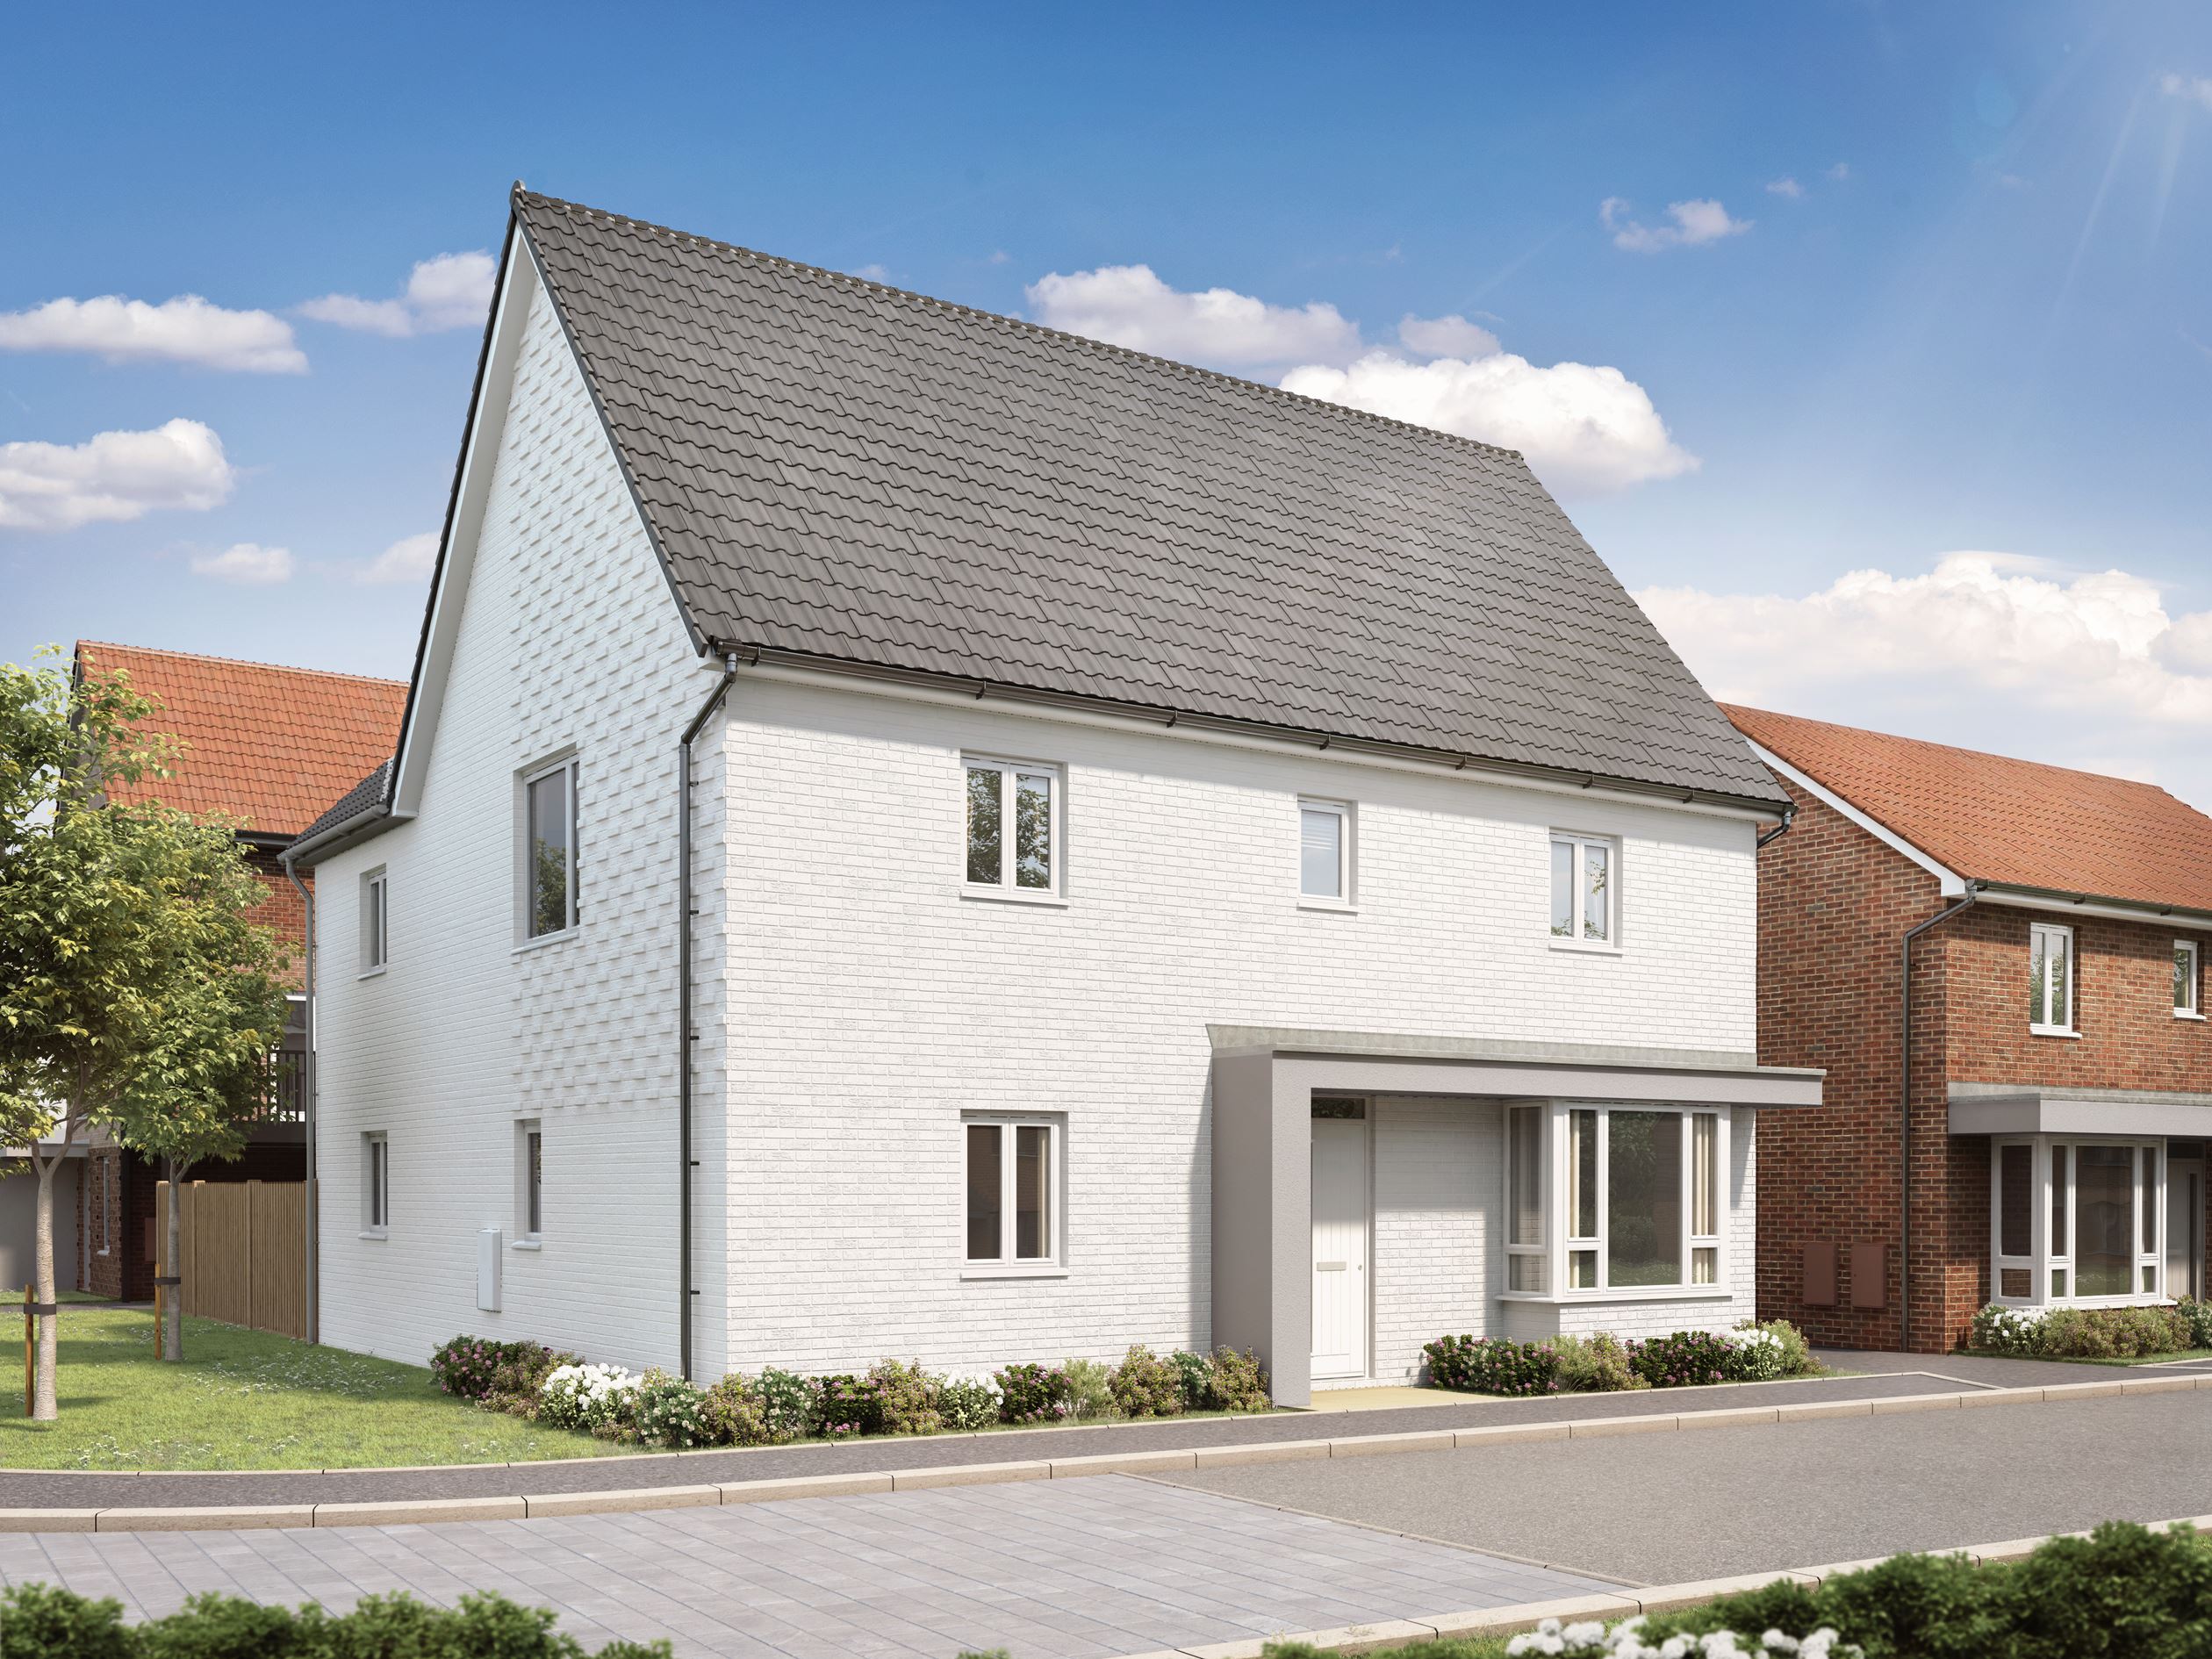 Property 2 of 10. The Rowan Four Bedroom Home External View CGI